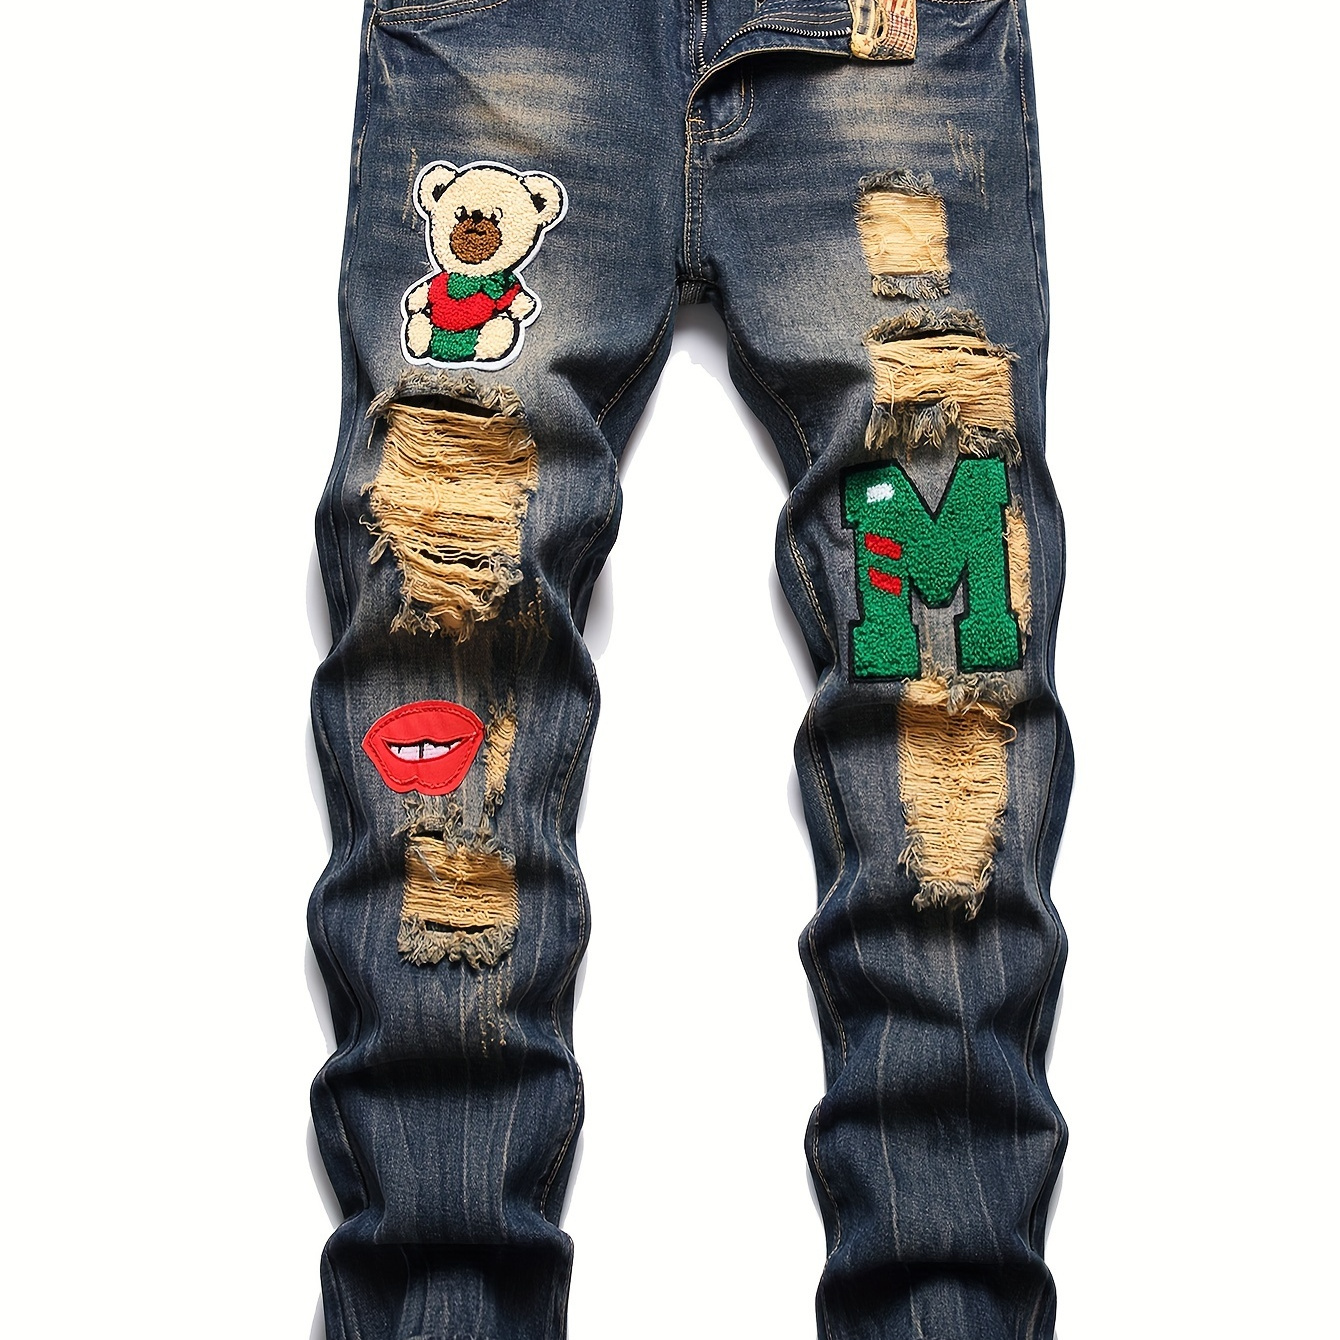 

Boy's Trendy Cartoon Graphic Embroidery Ripped Jeans, Zipper Fly Slim Fit Denim Pants